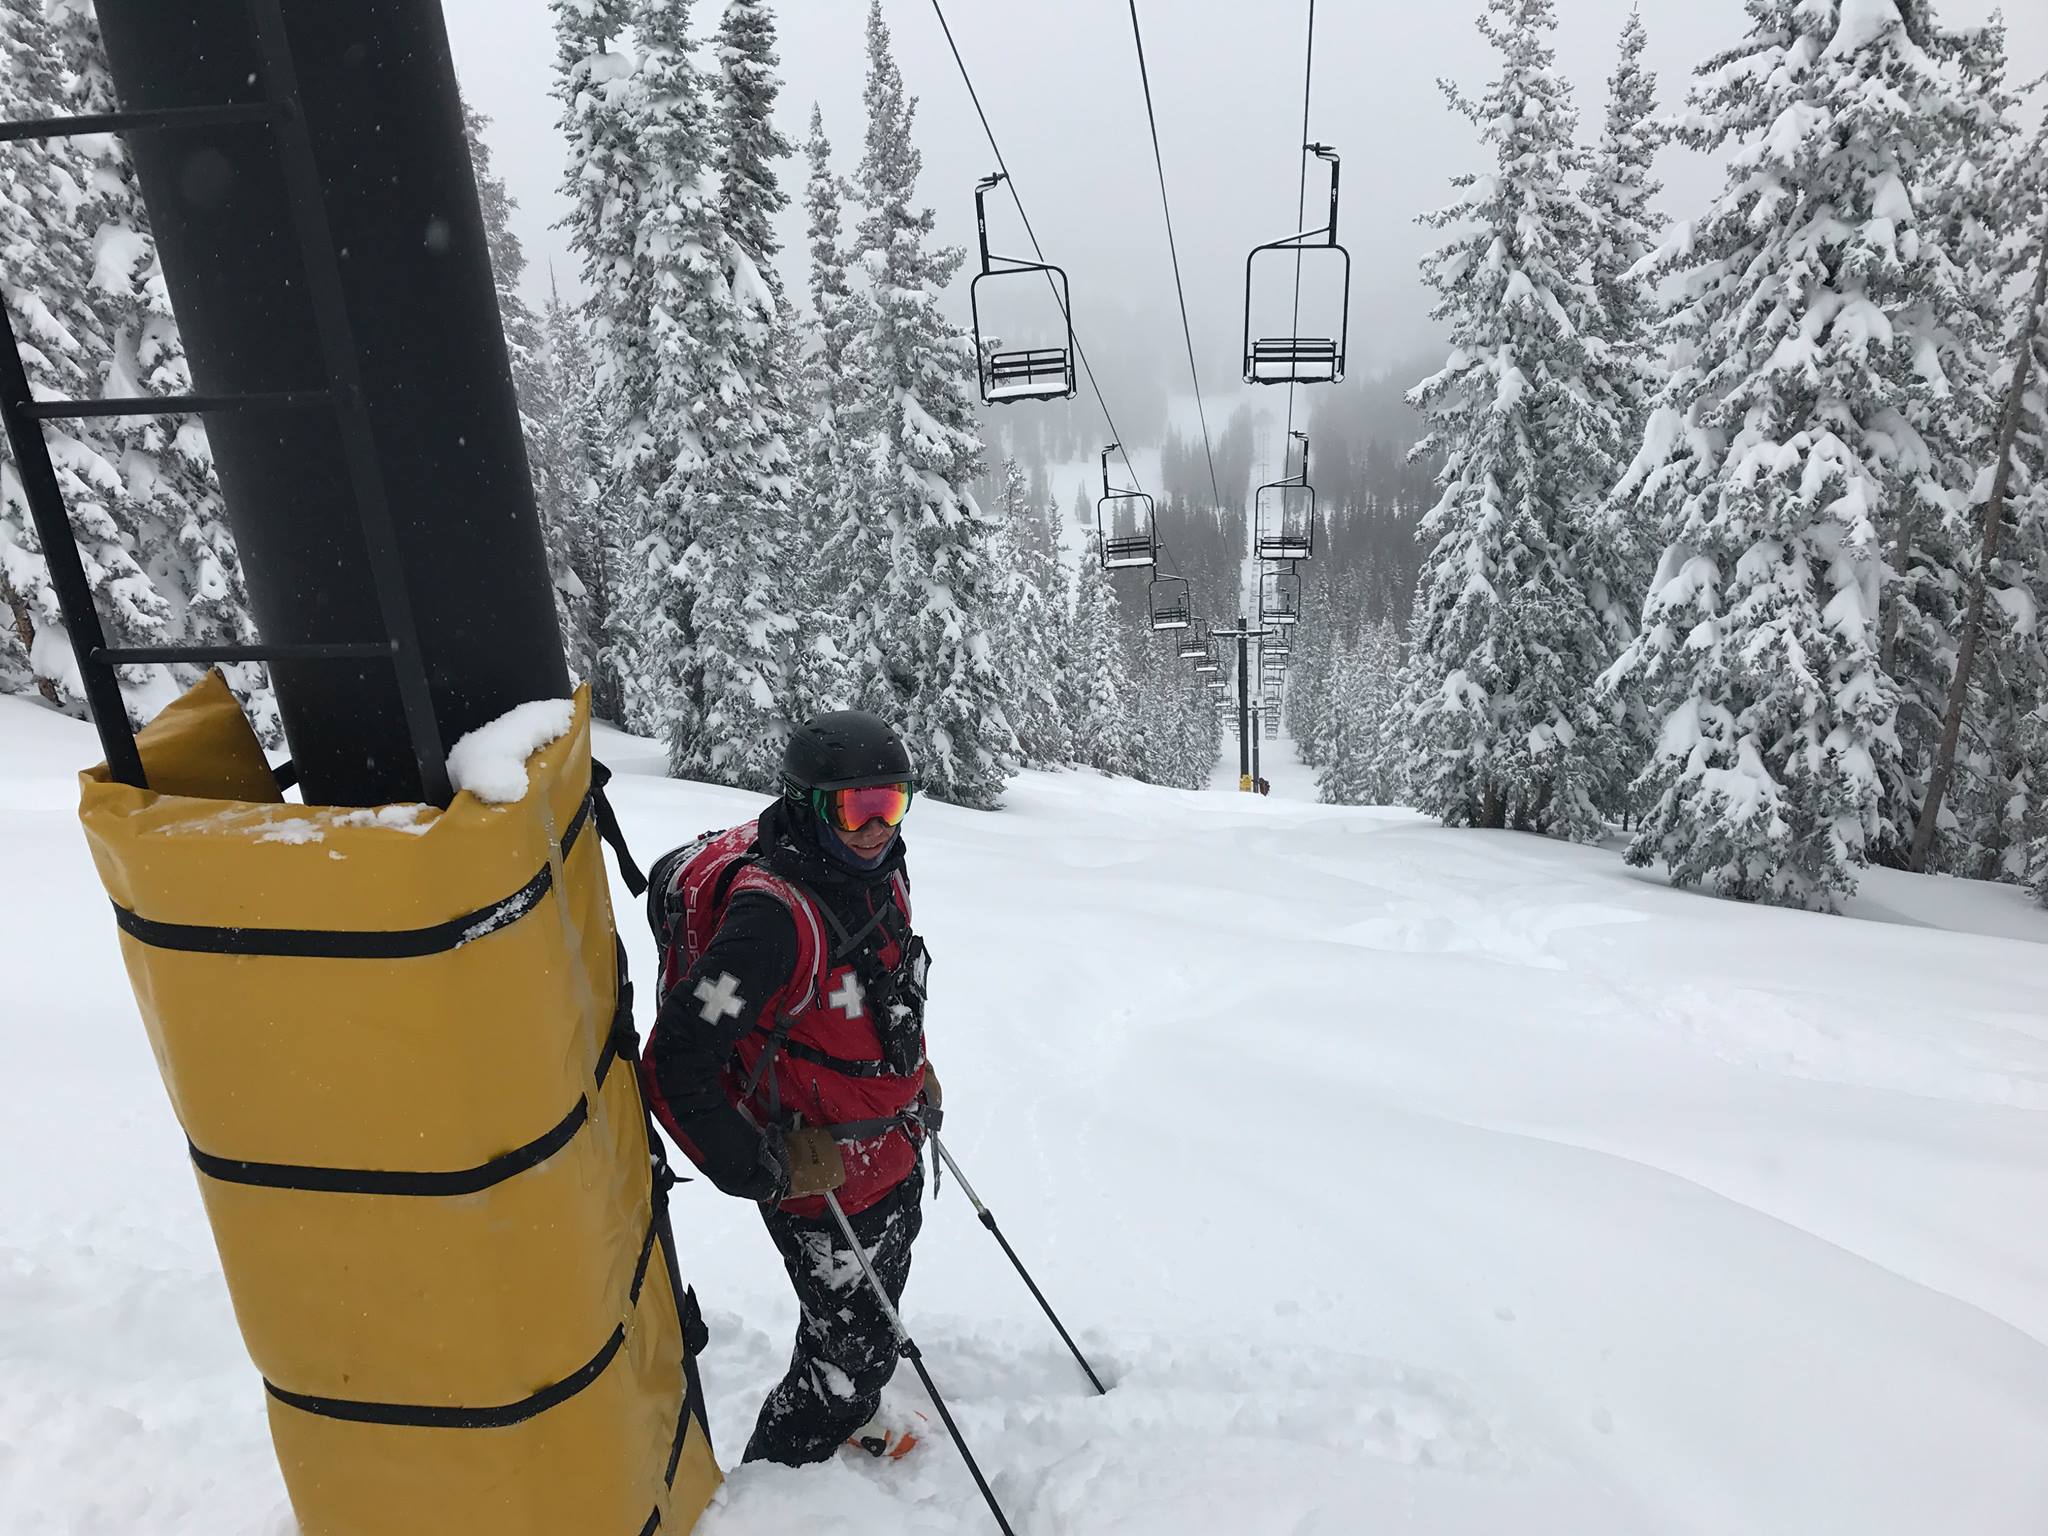 Monarch Mountain reopened today. Powder everywhere. Credit: Monarch Mountain FB page